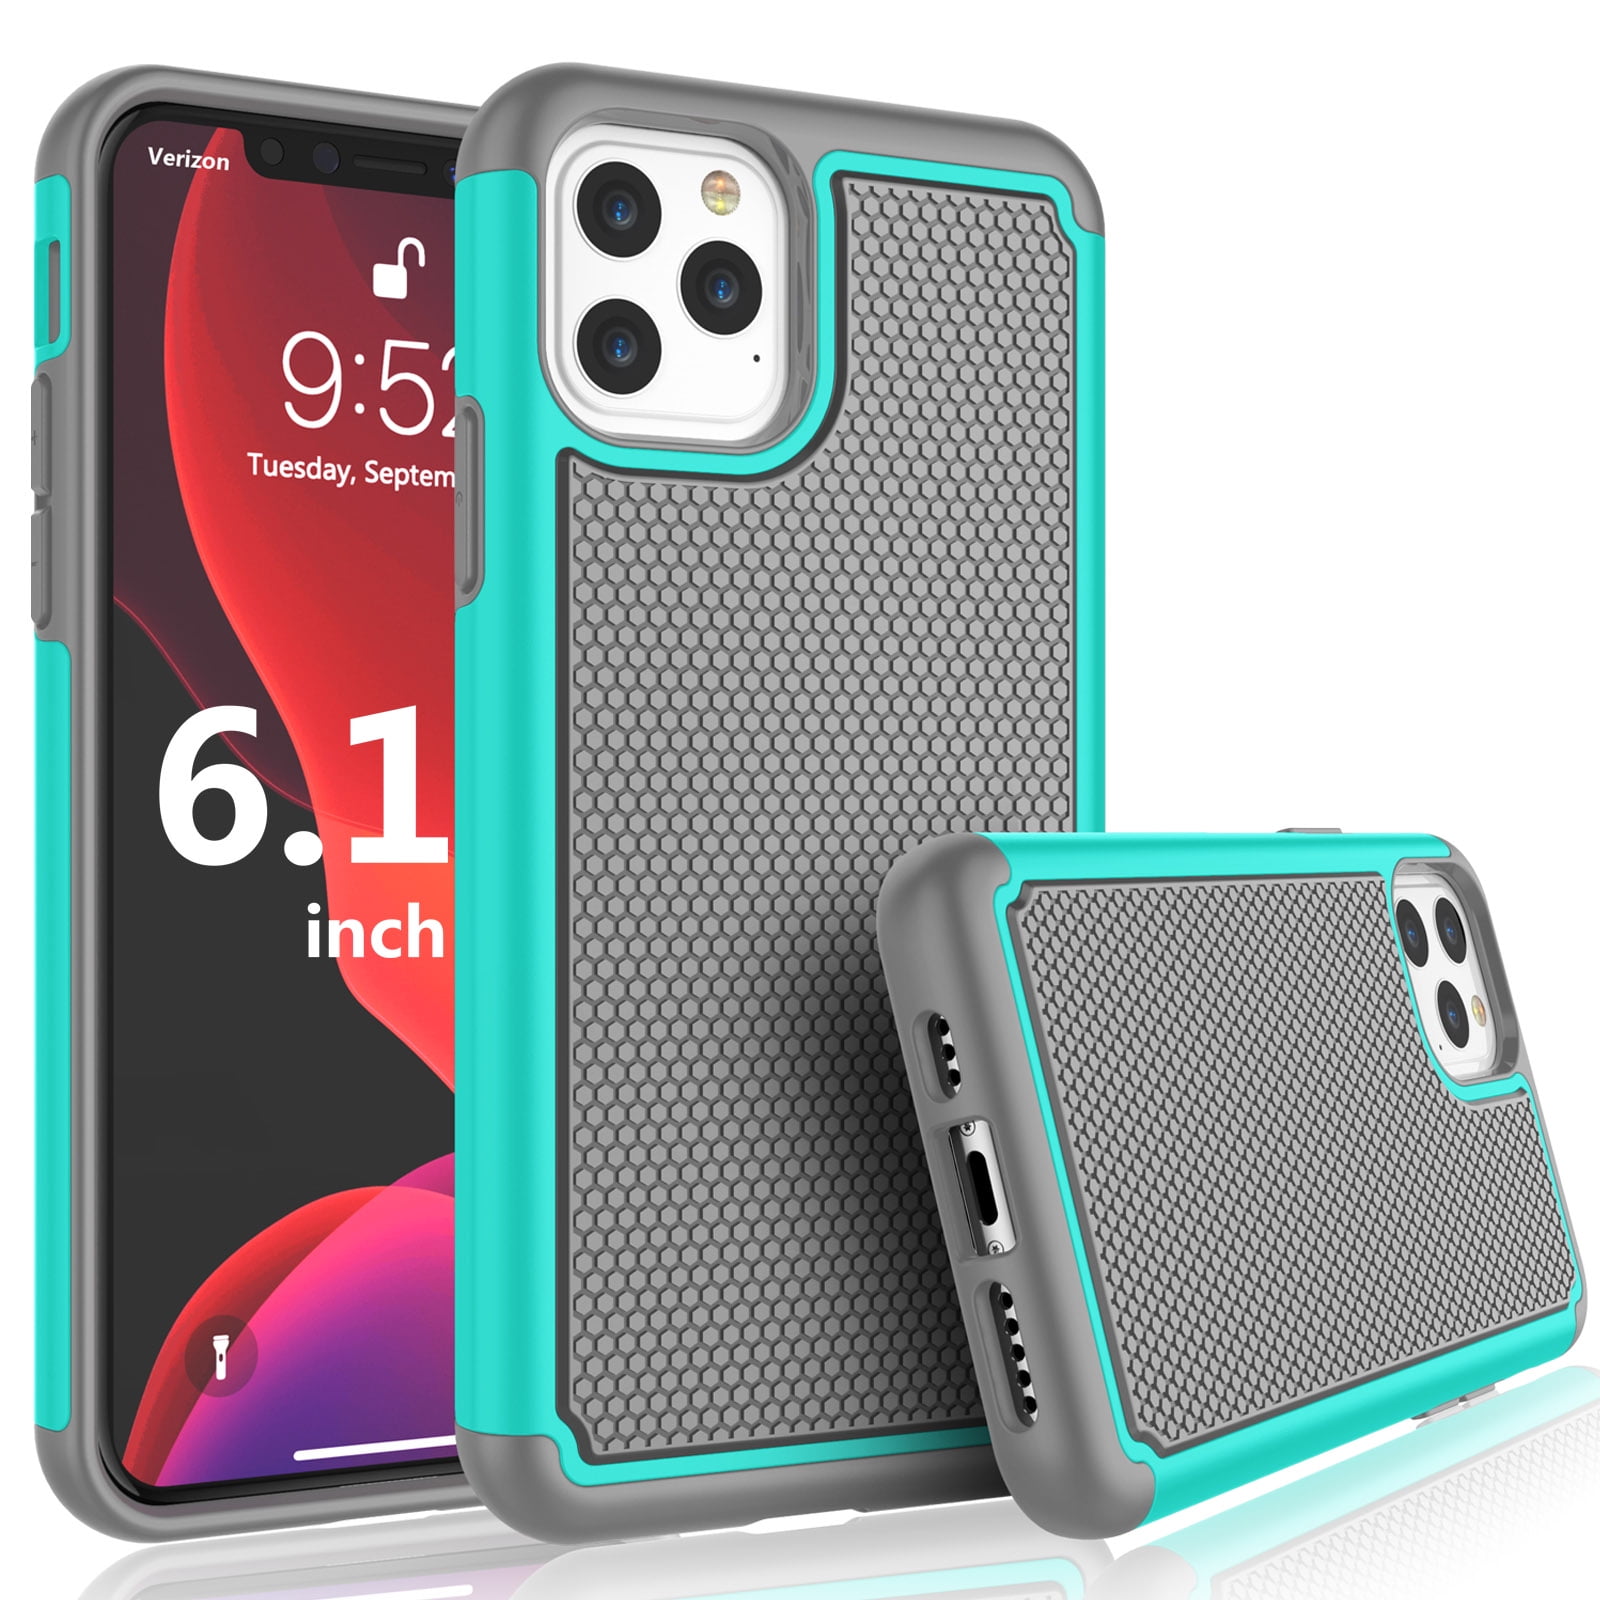 iPhone 11 Cases, Sturdy Phone Case for Apple iPhone 11 6.1 inch, Tekcoo Full-Body Shockproof Protection Heavy Duty Armor Hard Plastic & Shock